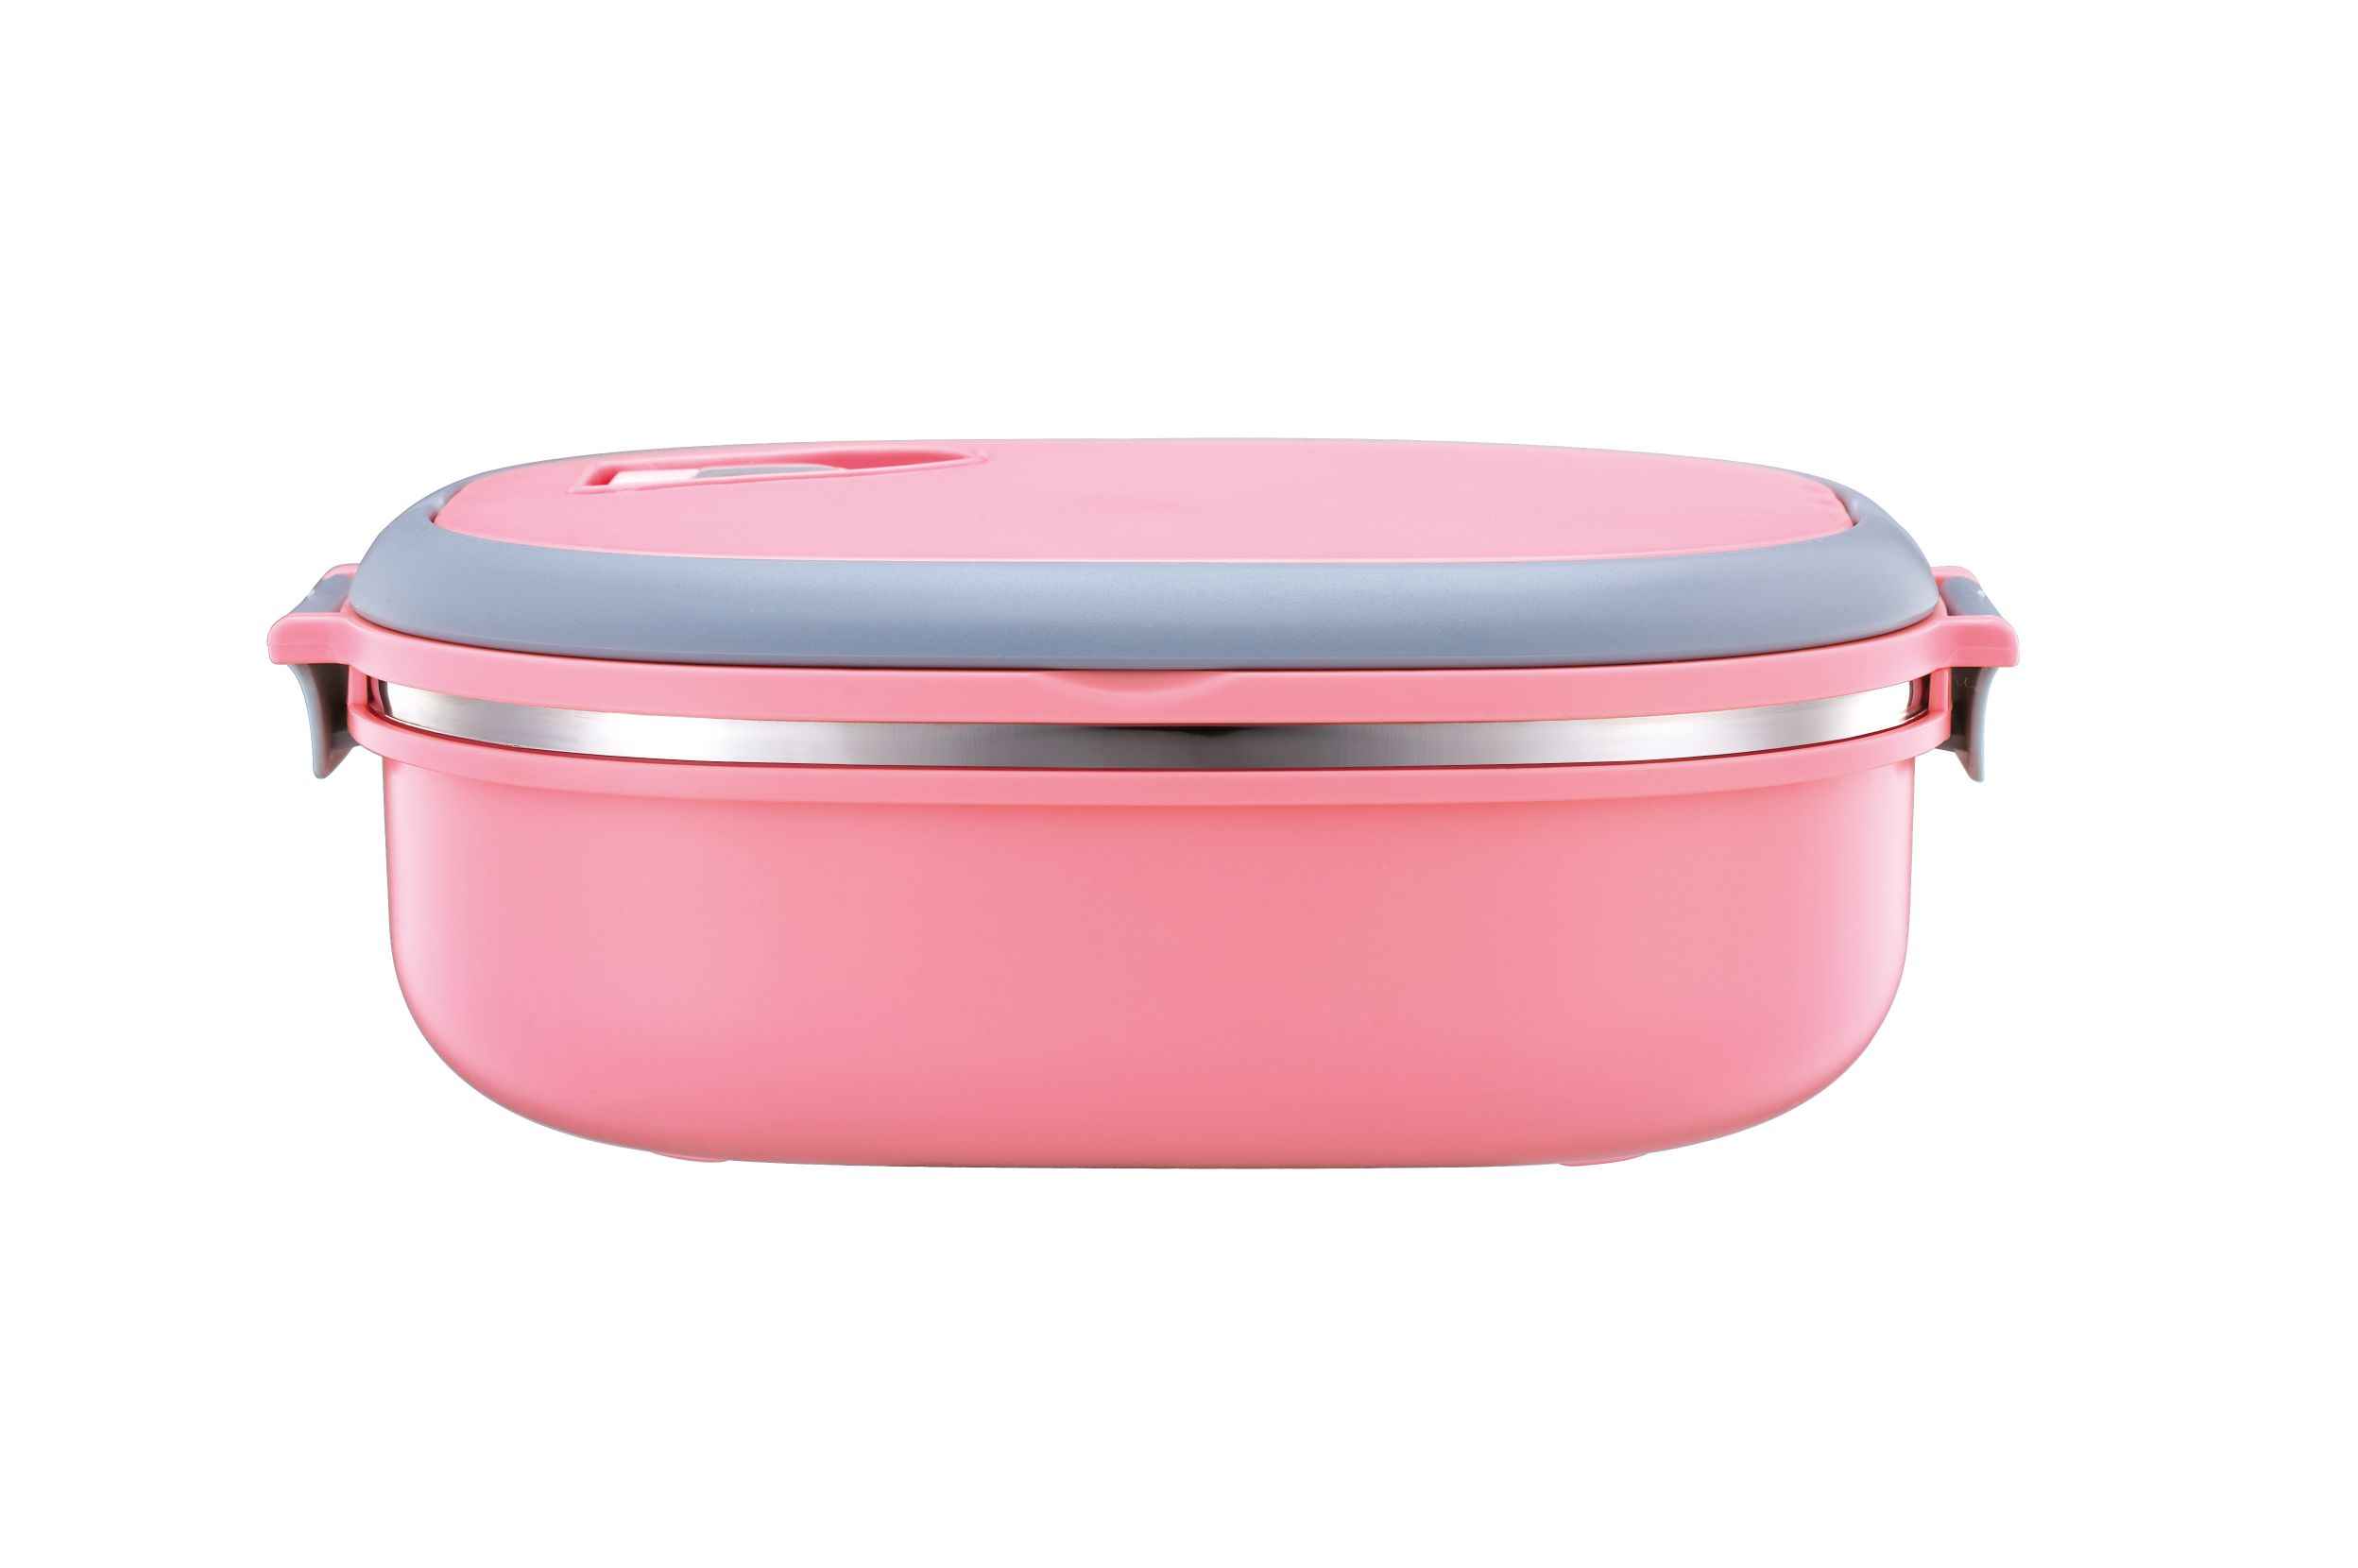 Royalford Lunch Box - Thermal Lunch Box Bento Lunch Box With Stainless Steel Thermal Insulation - Pink